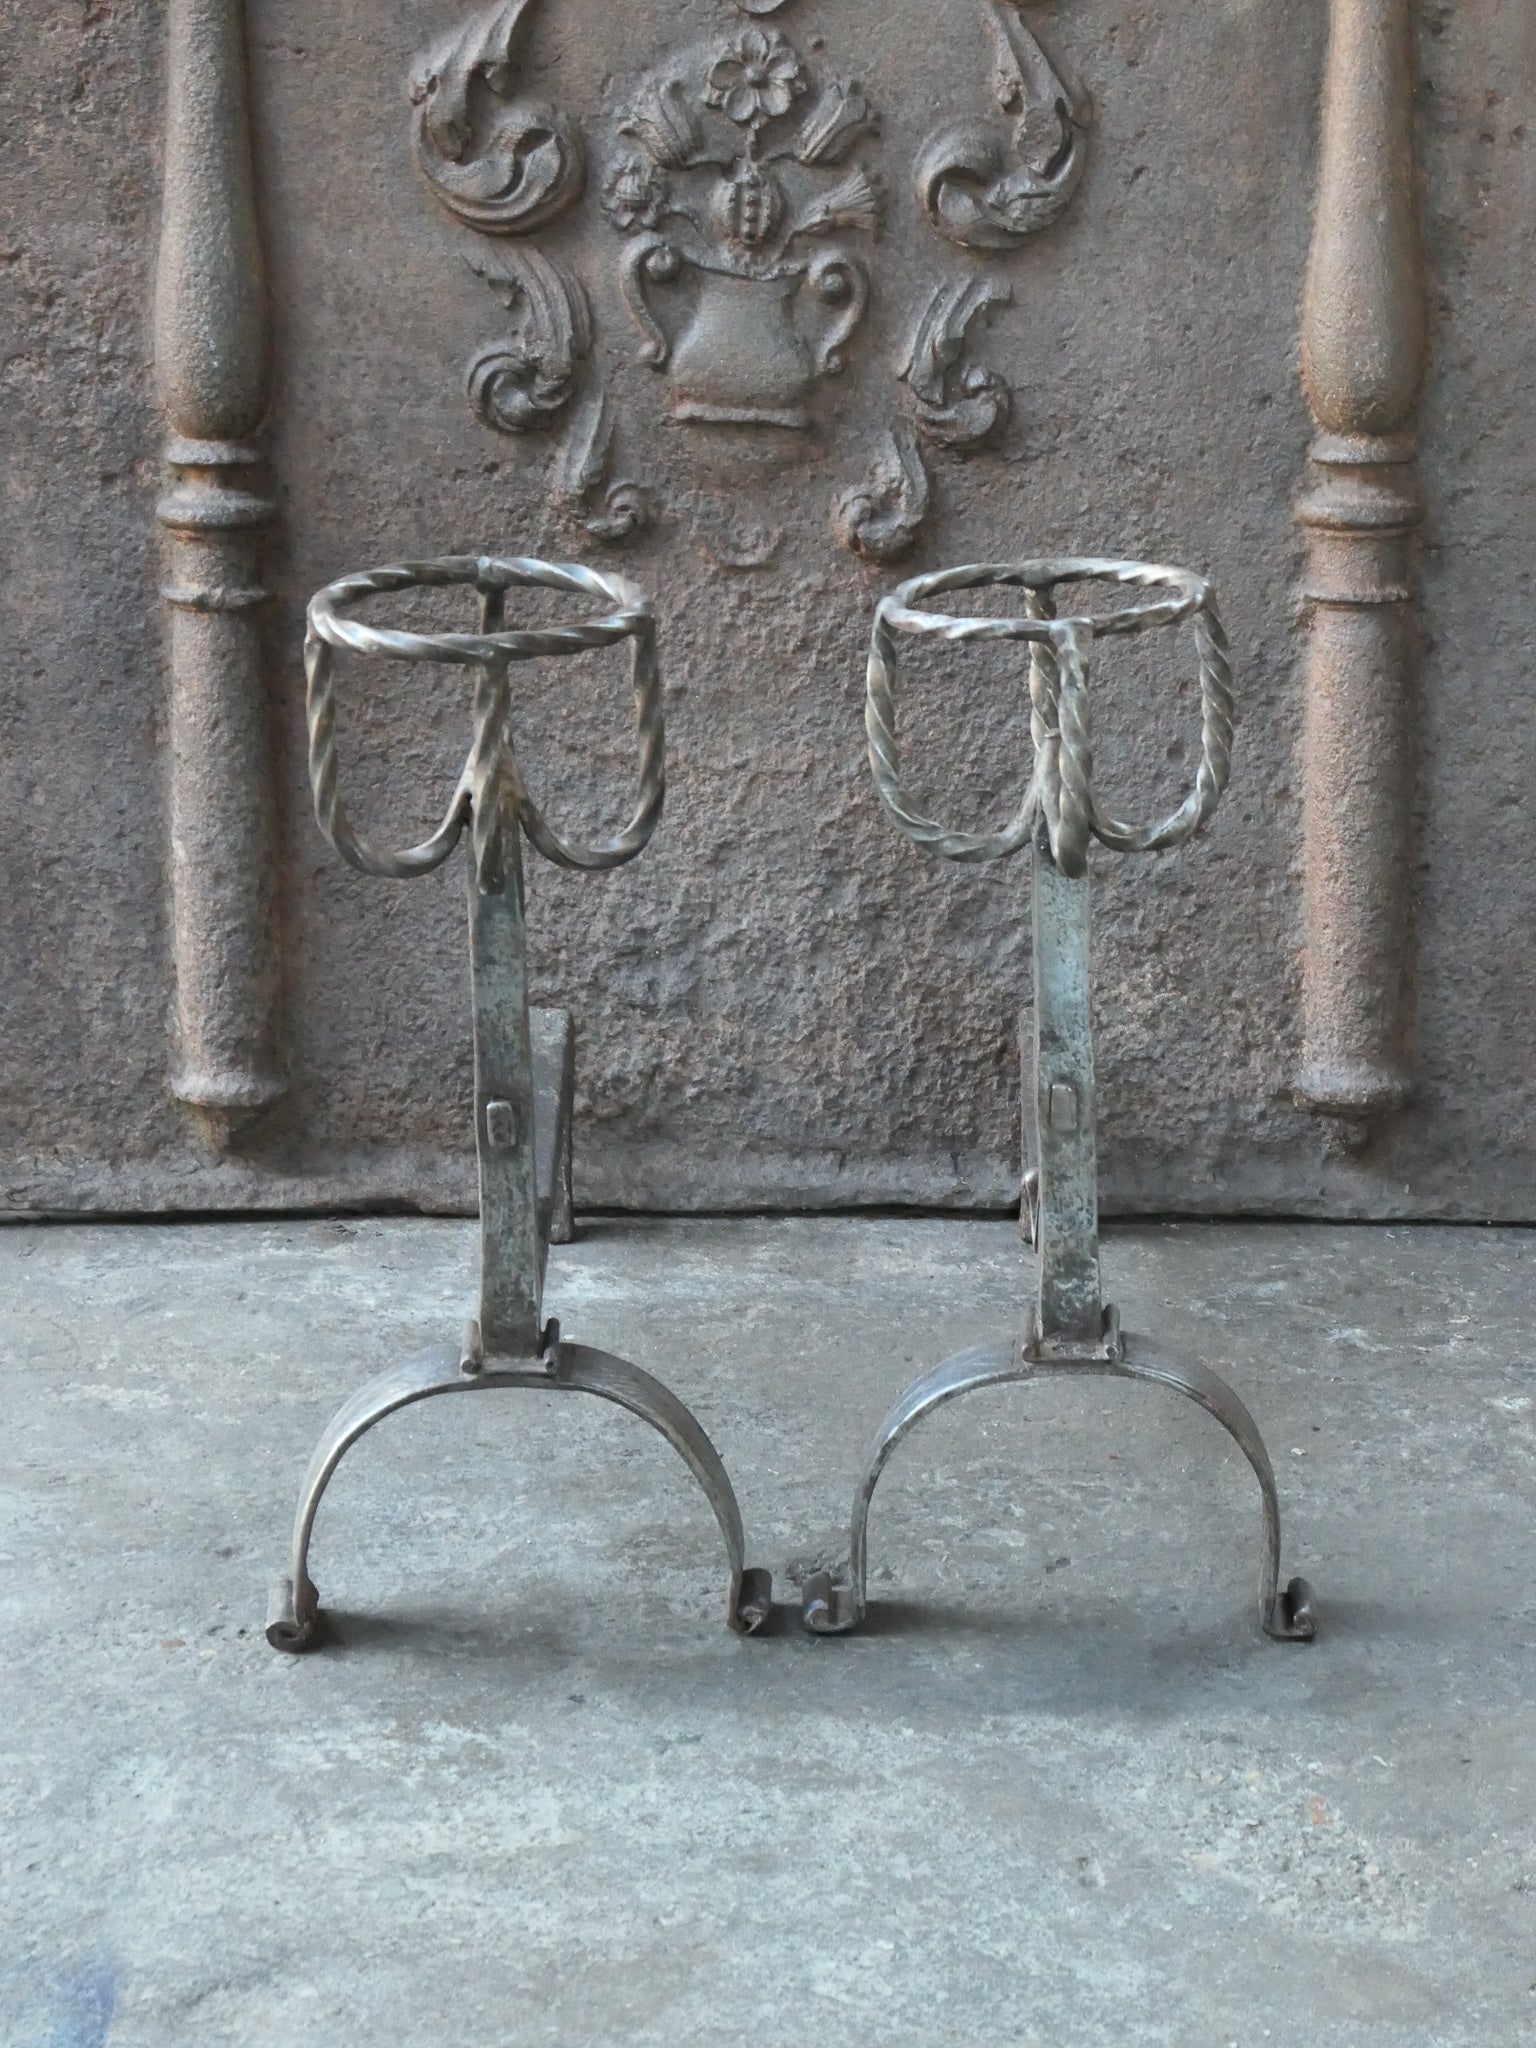 17th/18th Century English andirons made of polished steel. The andirons have a Gothic period style. The condition is good.